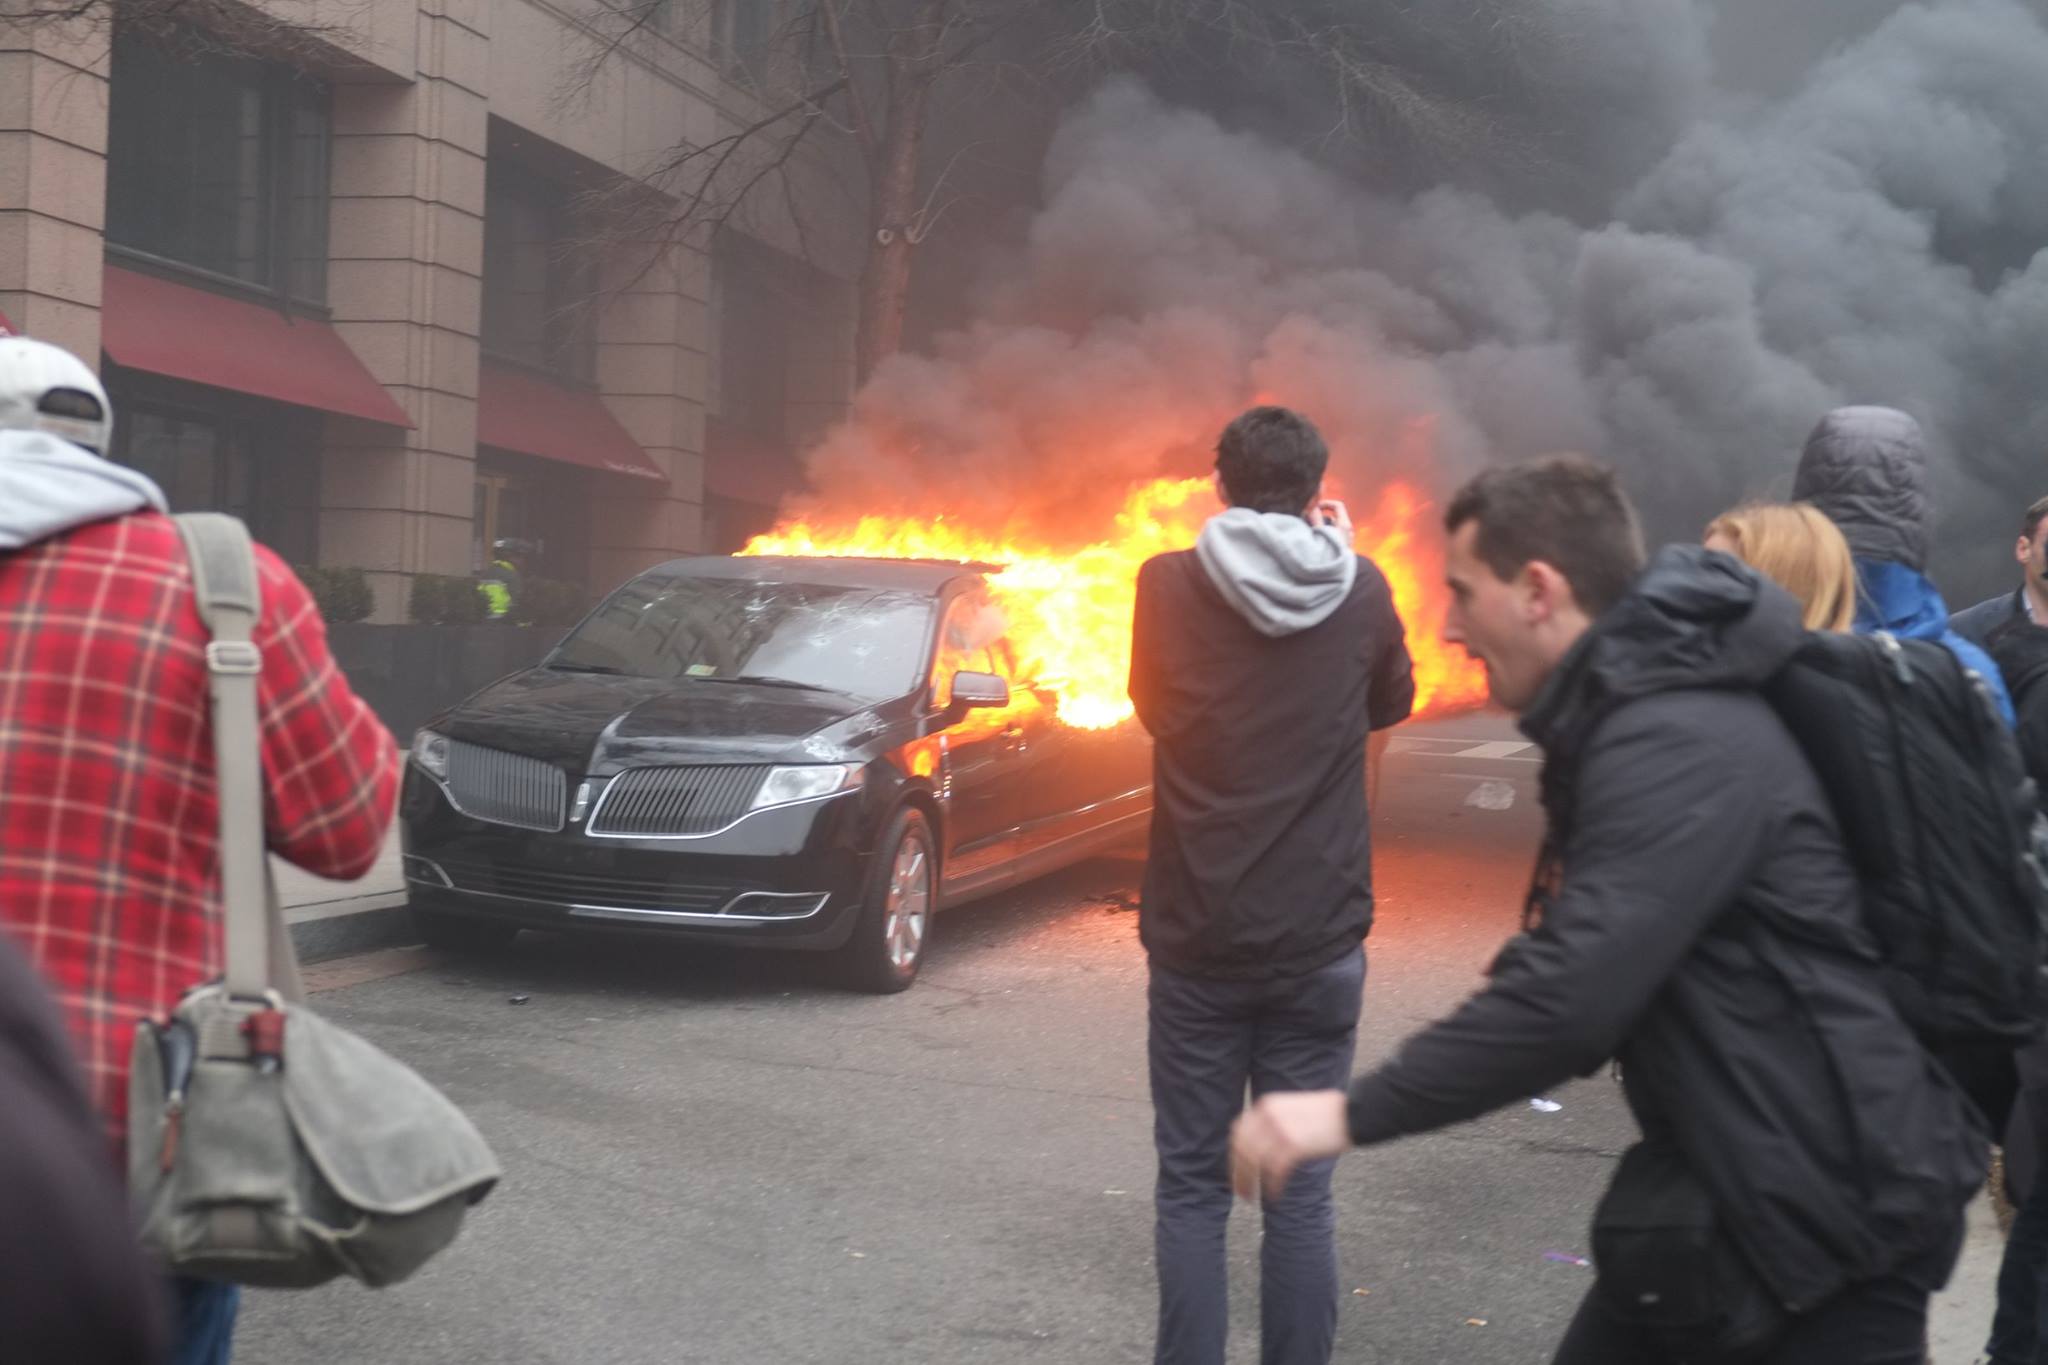 Anarchist protests set a limousine on fire in downtown Washington, D.C., on inauguration day. Photos by John Penley